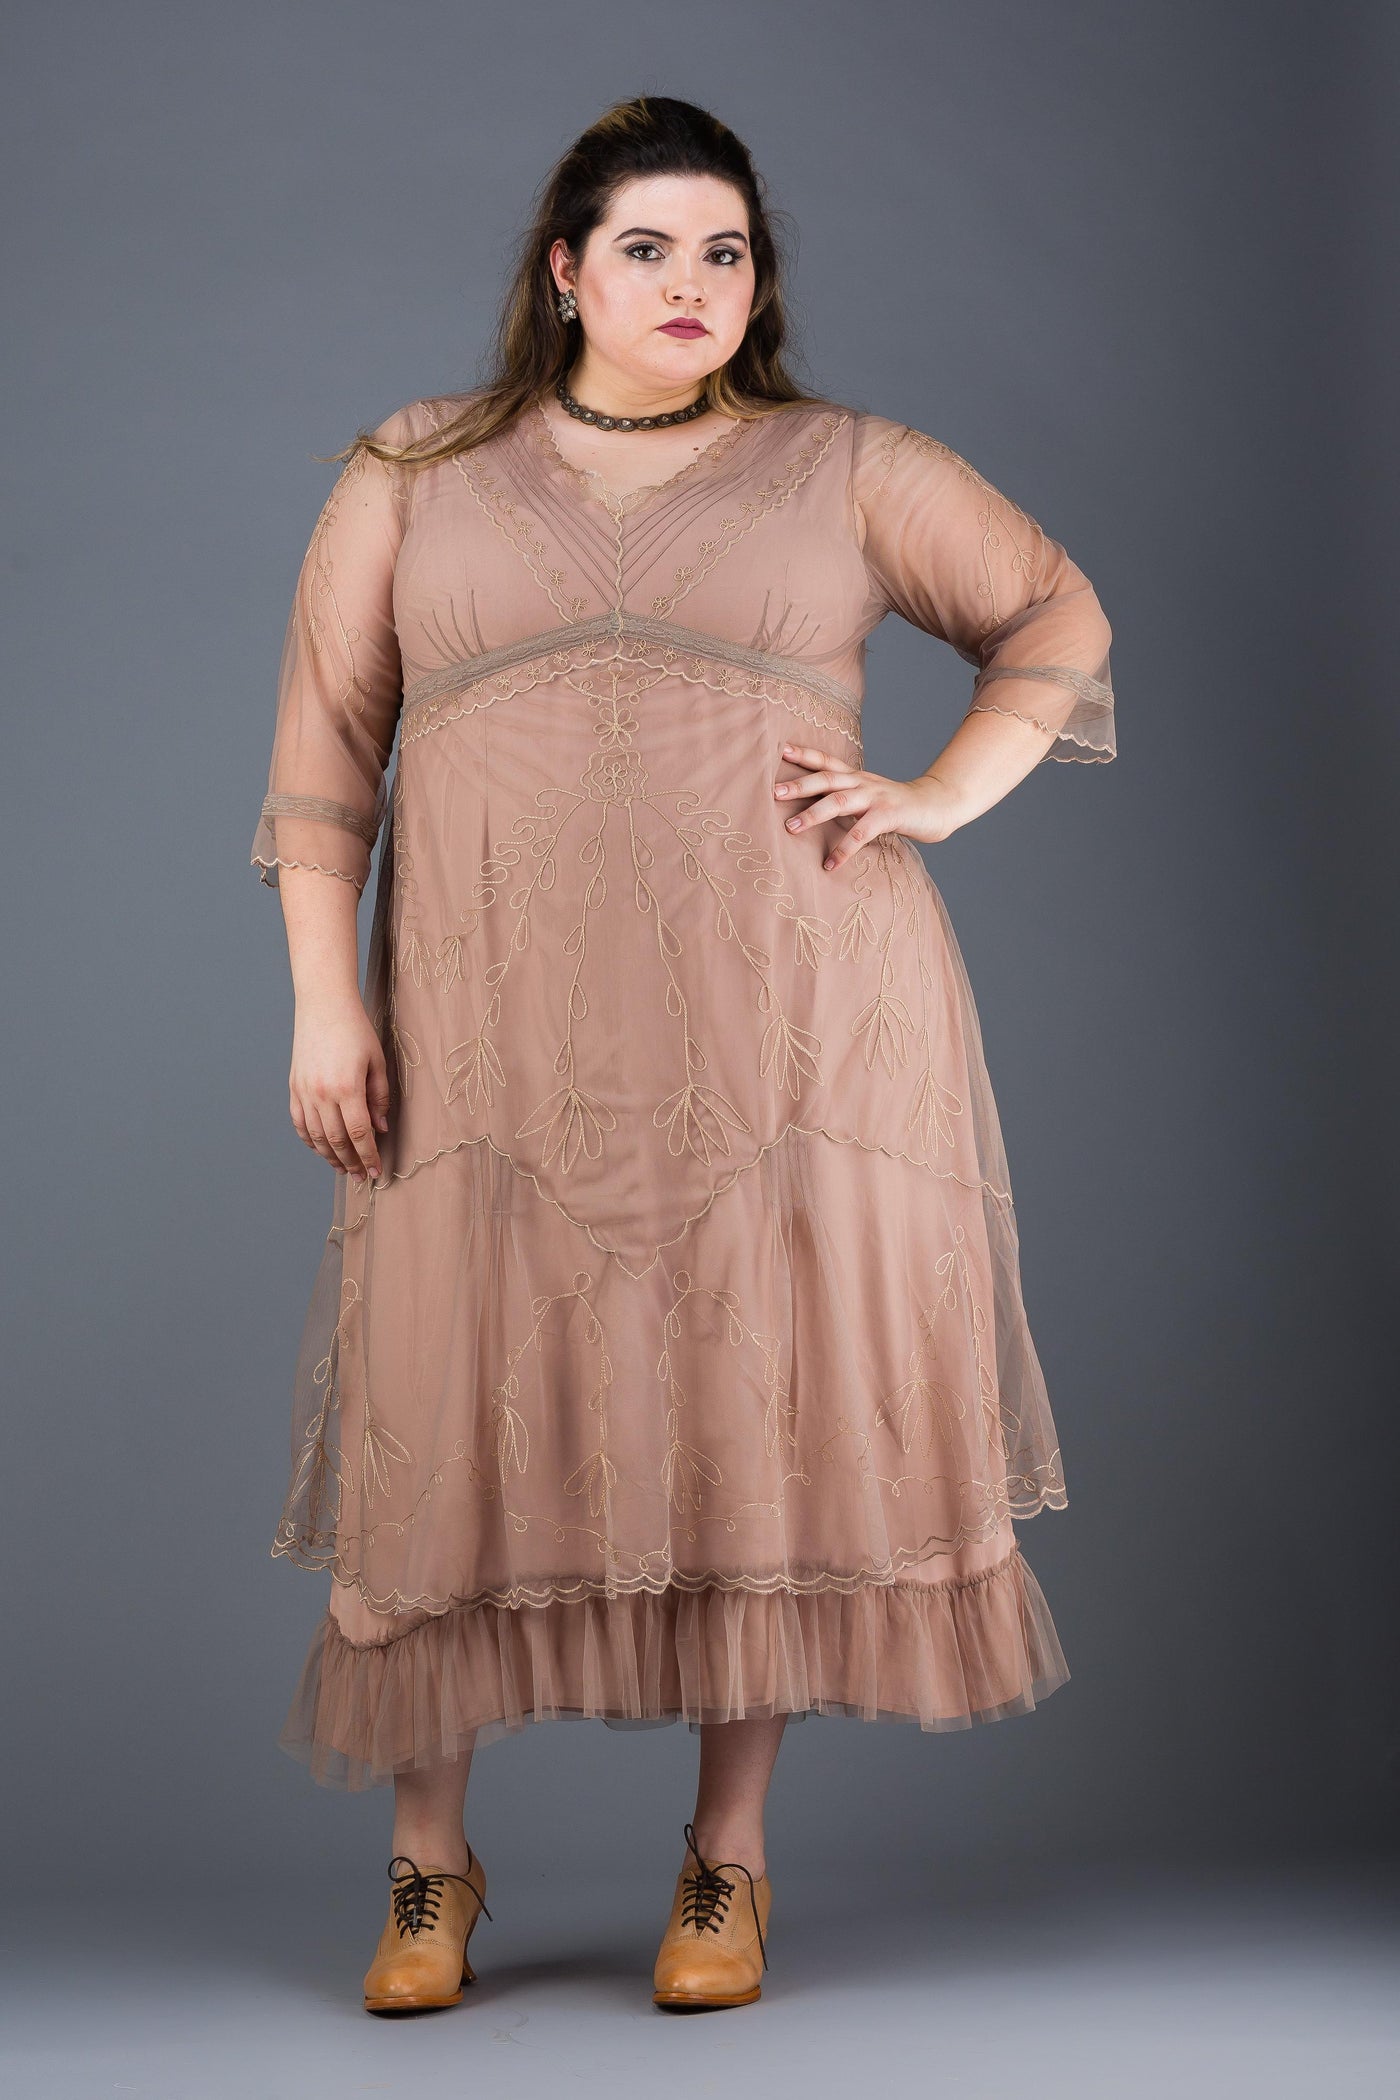 Plus Size Somewhere in Time Dress in Sand by Nataya